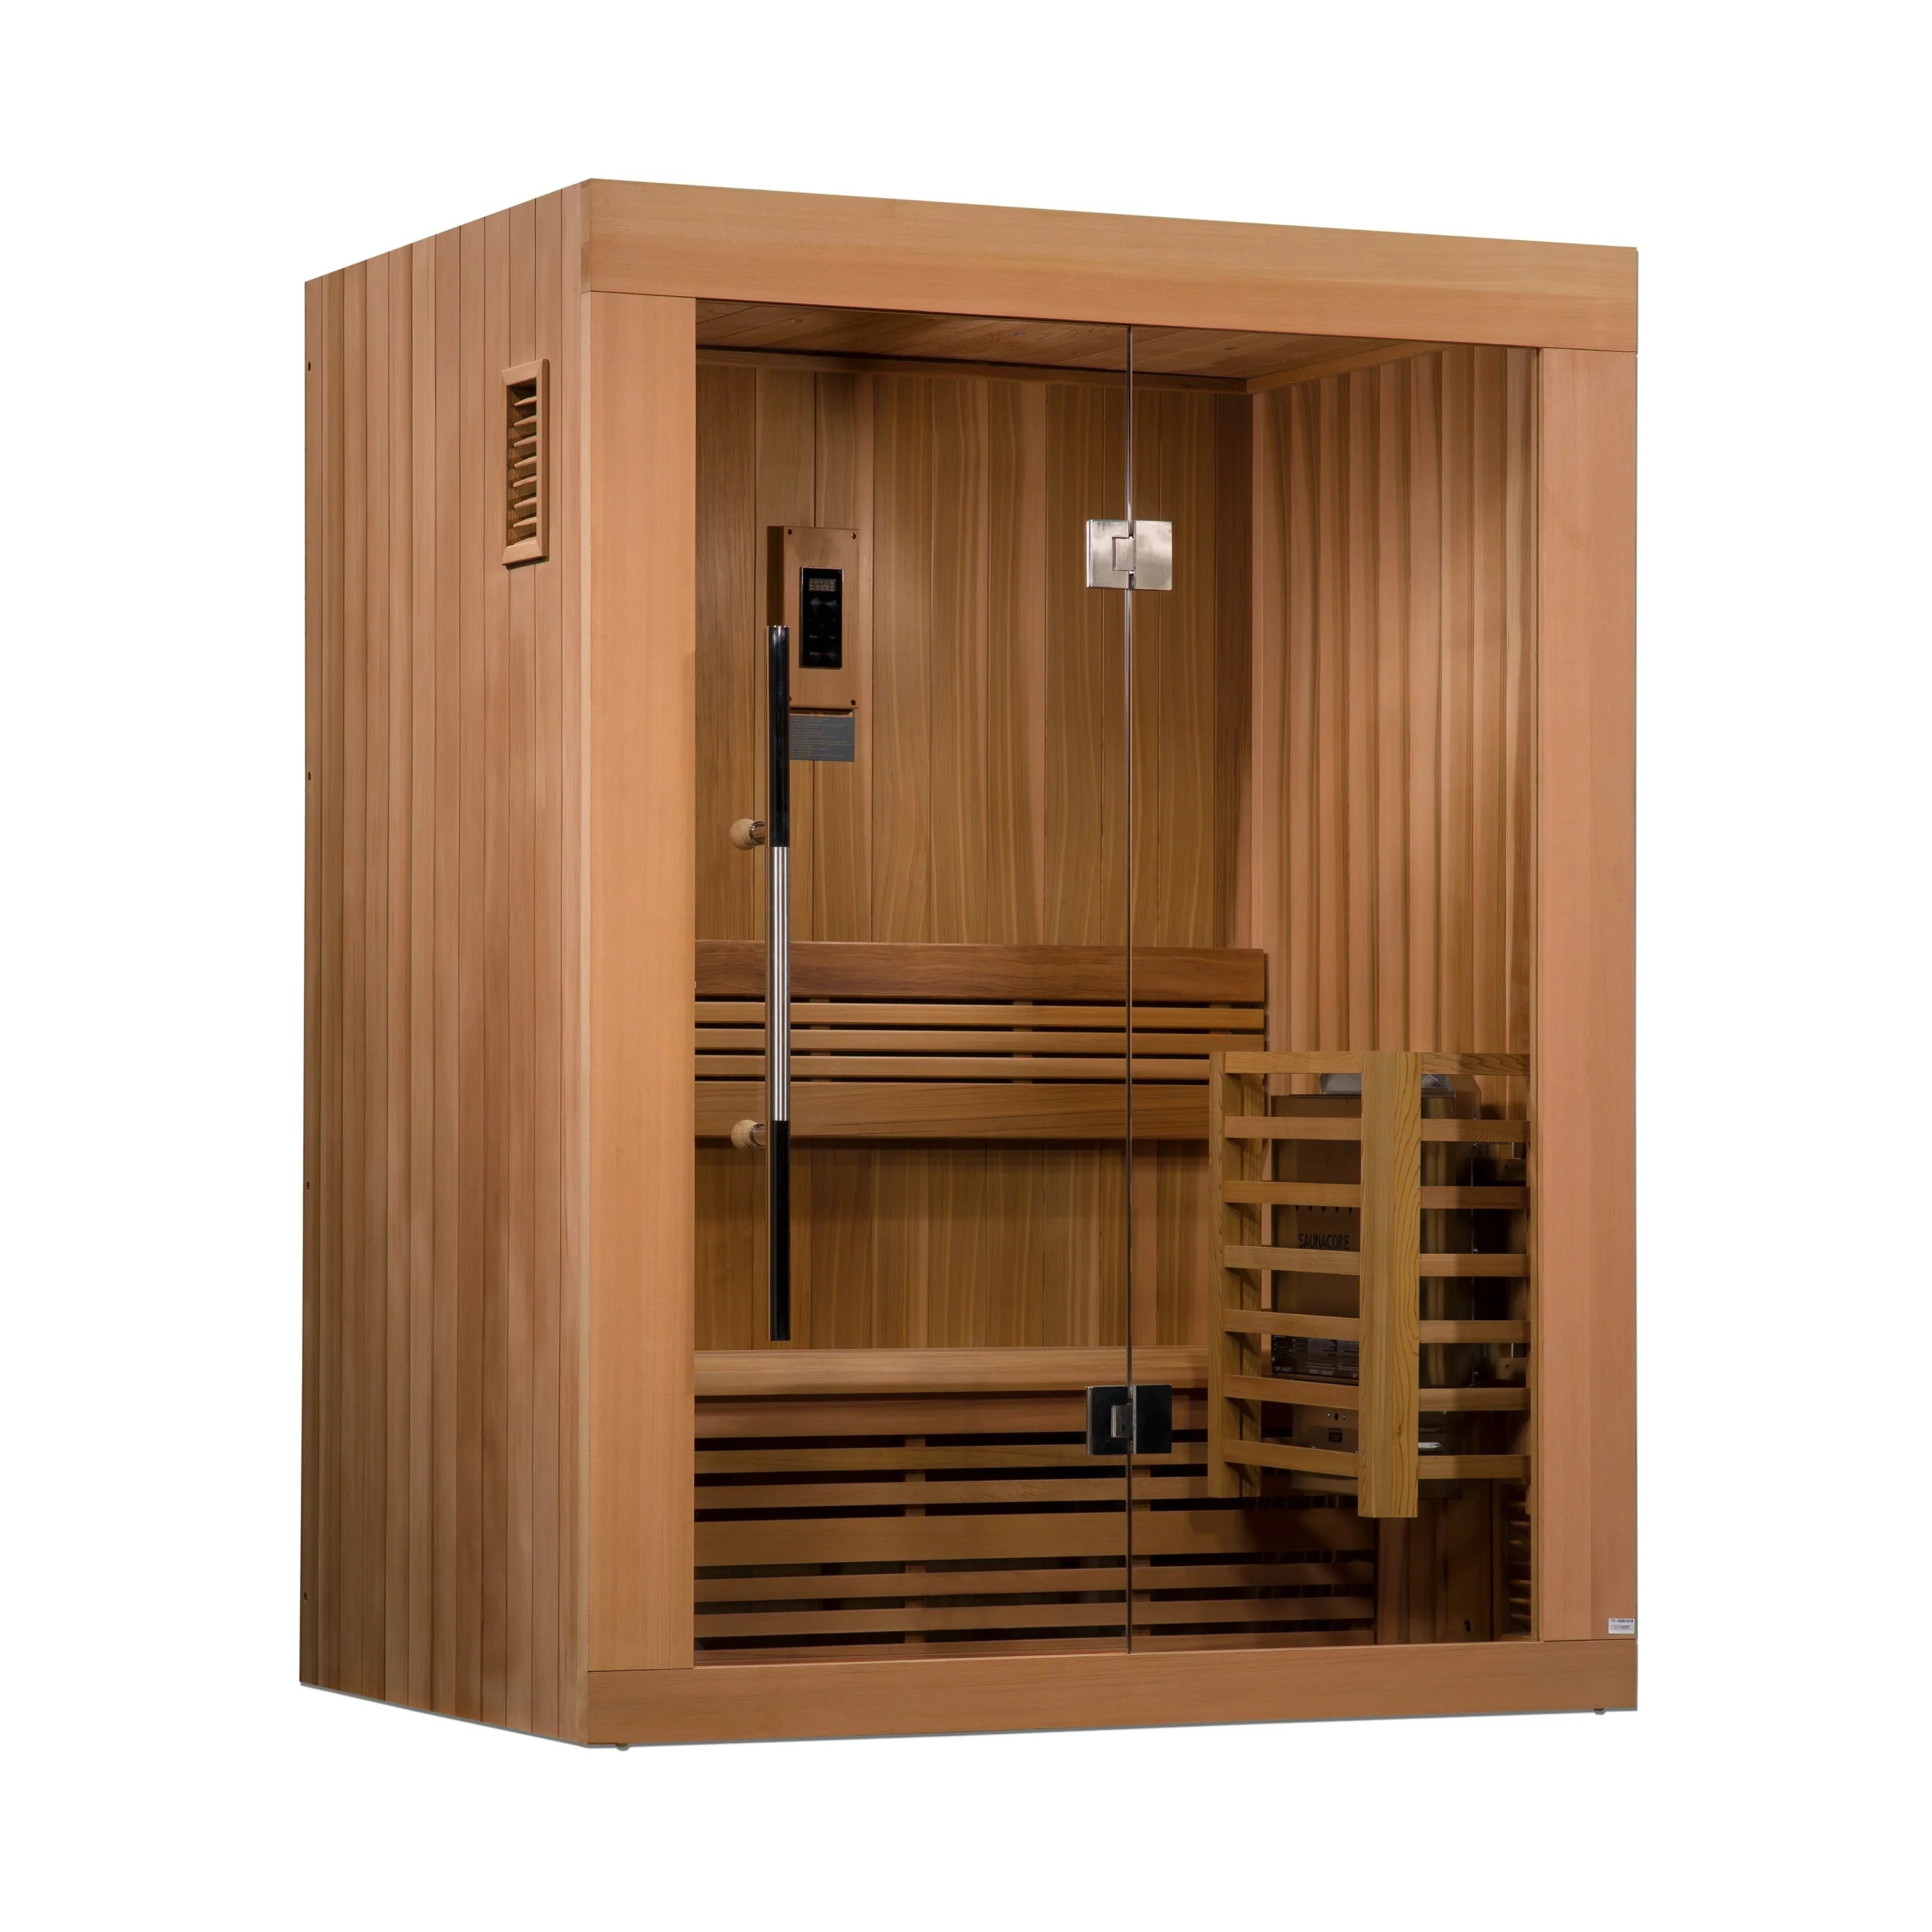 Golden Designs Sundsvall 2 Person Traditional Sauna INFRARED SAUNA Golden Designs Saunas   